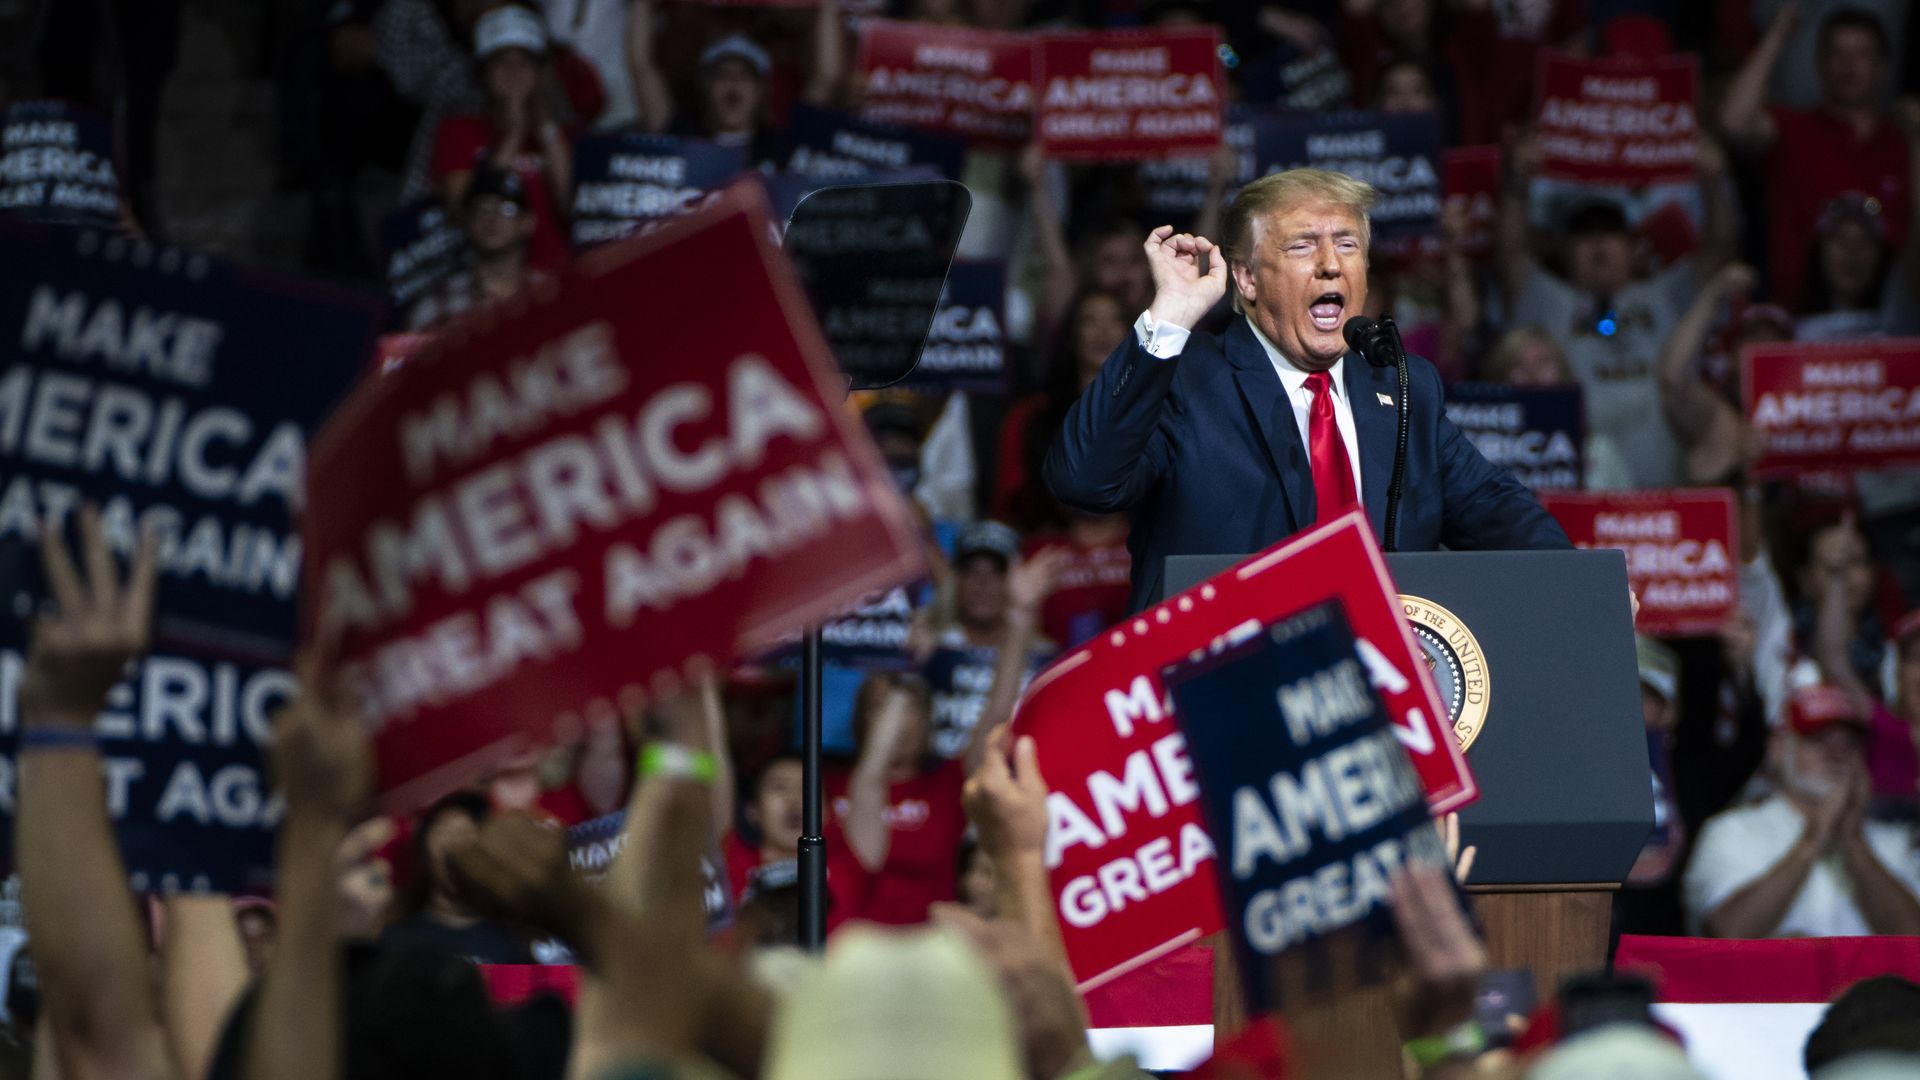 President Trump speaking at a rally in Tulsa as people wave "Make America Great Again" signs